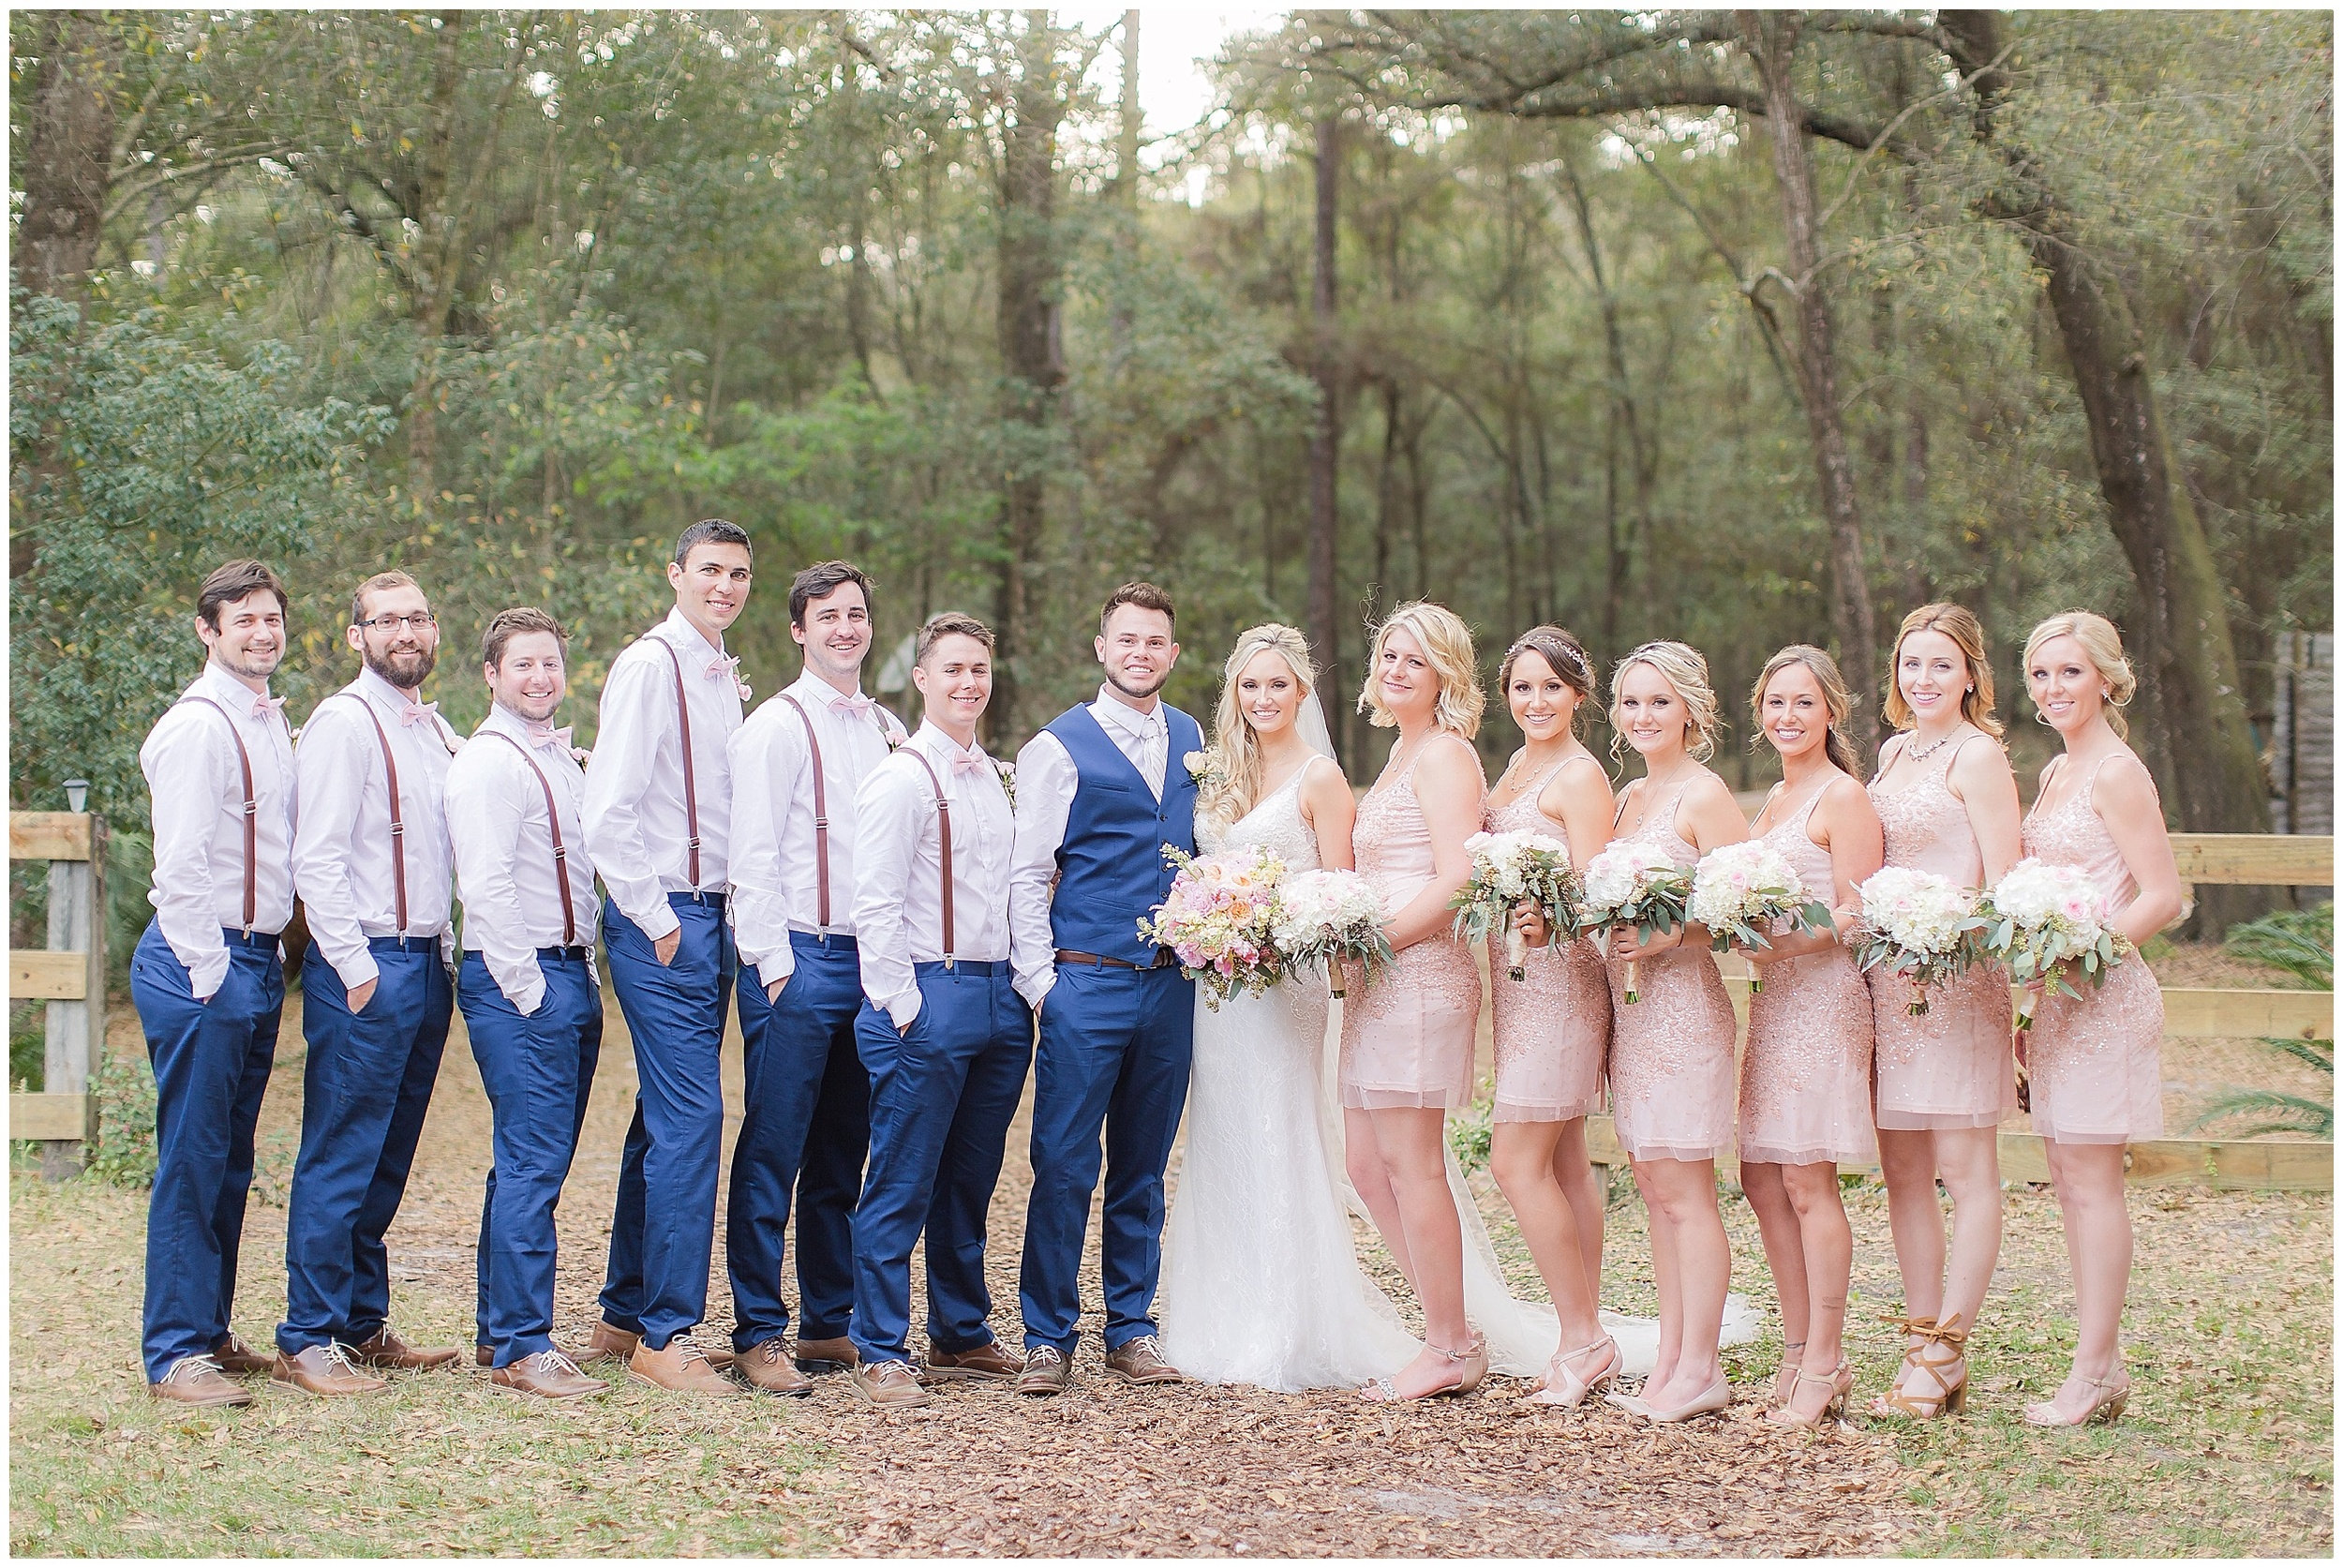 Bridal Party in Blush Dresses and Groomsman in Blue Suit Vest with Suspenders - Outside Wedding Photography 